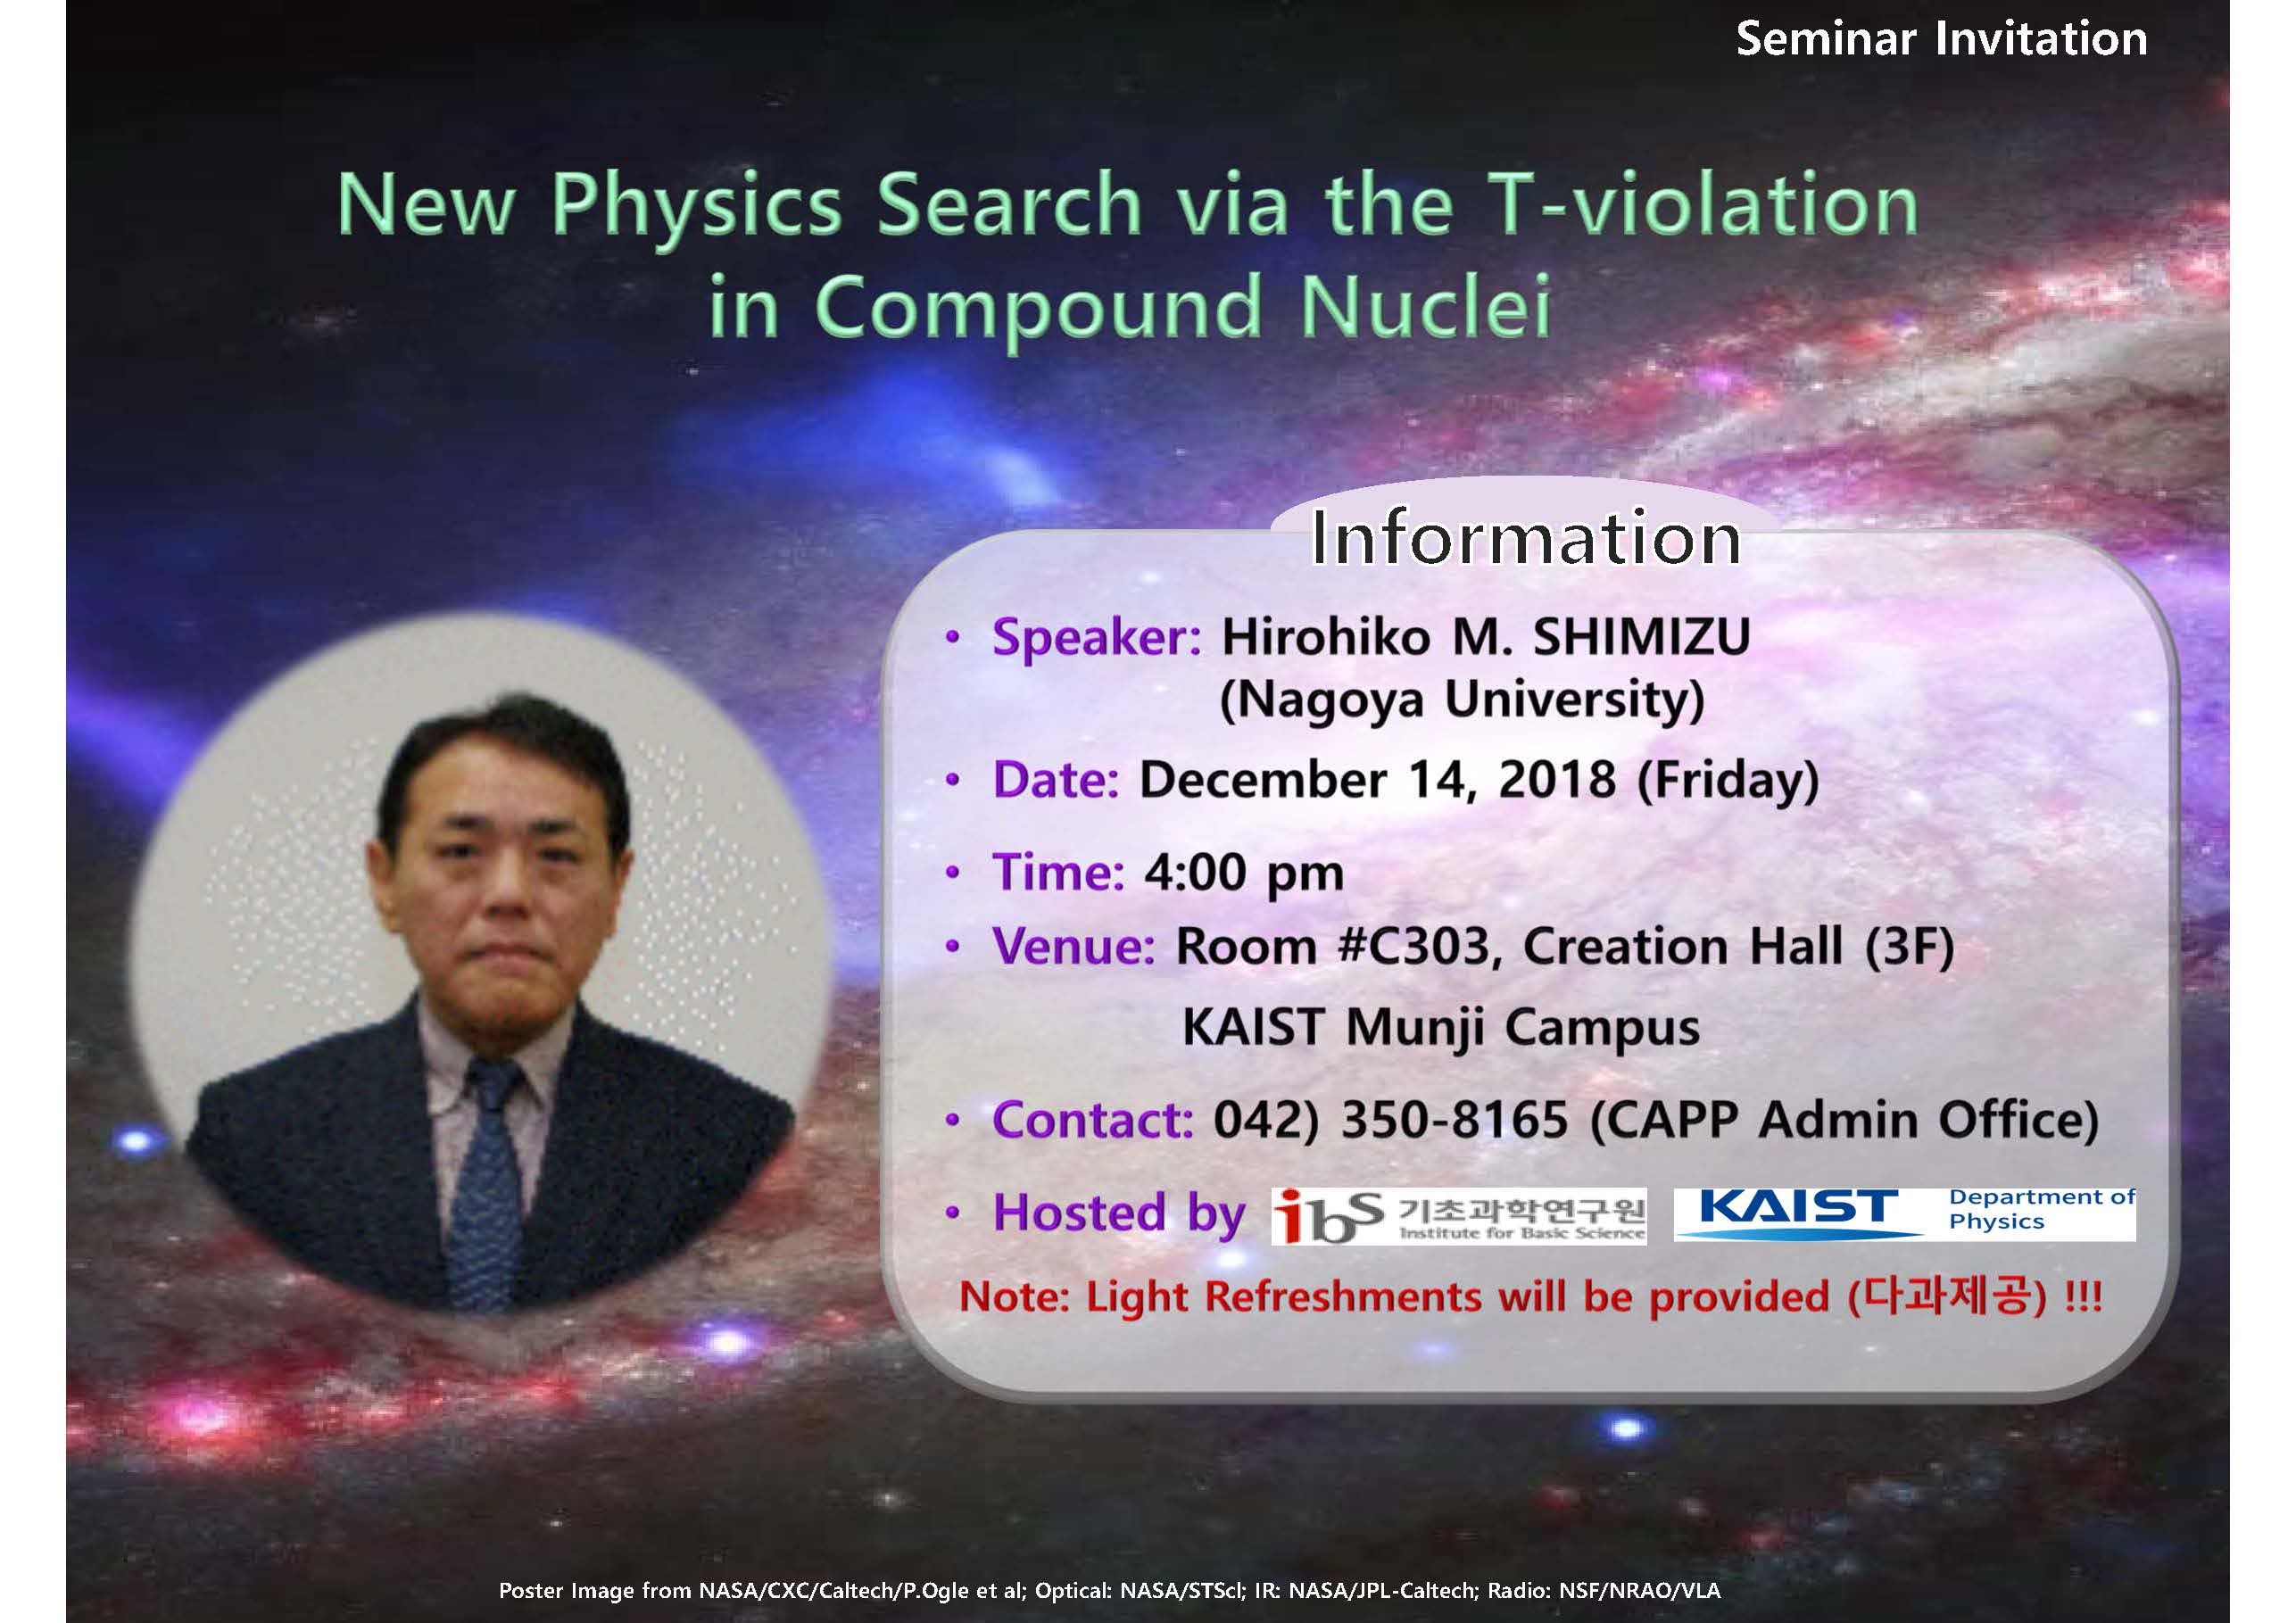 [CAPP 세미나] New Physics Search via the T-violation in Compound Nuclei 사진